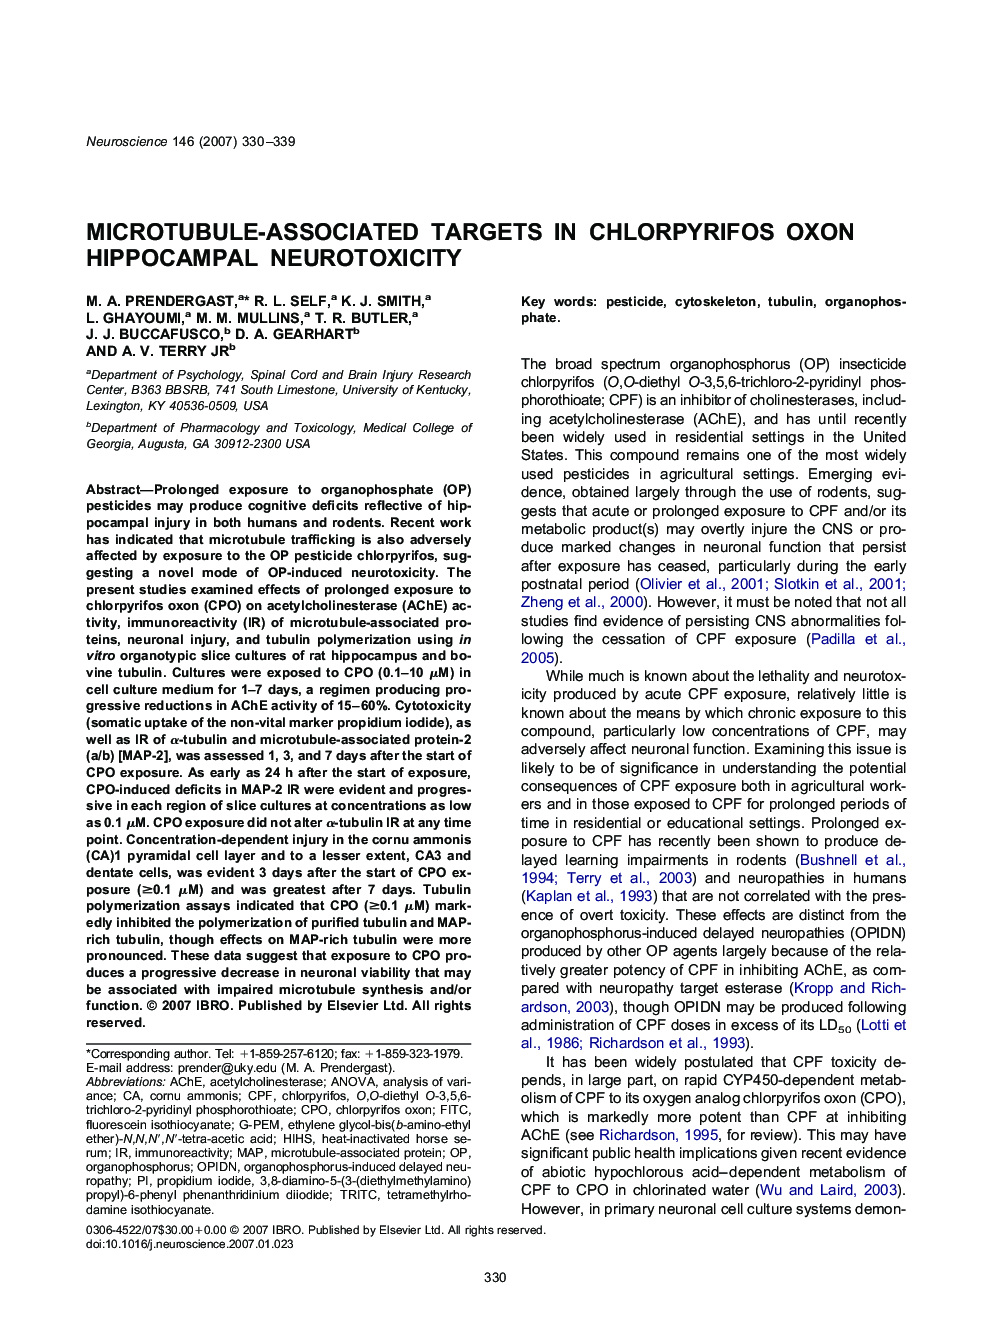 Microtubule-associated targets in chlorpyrifos oxon hippocampal neurotoxicity